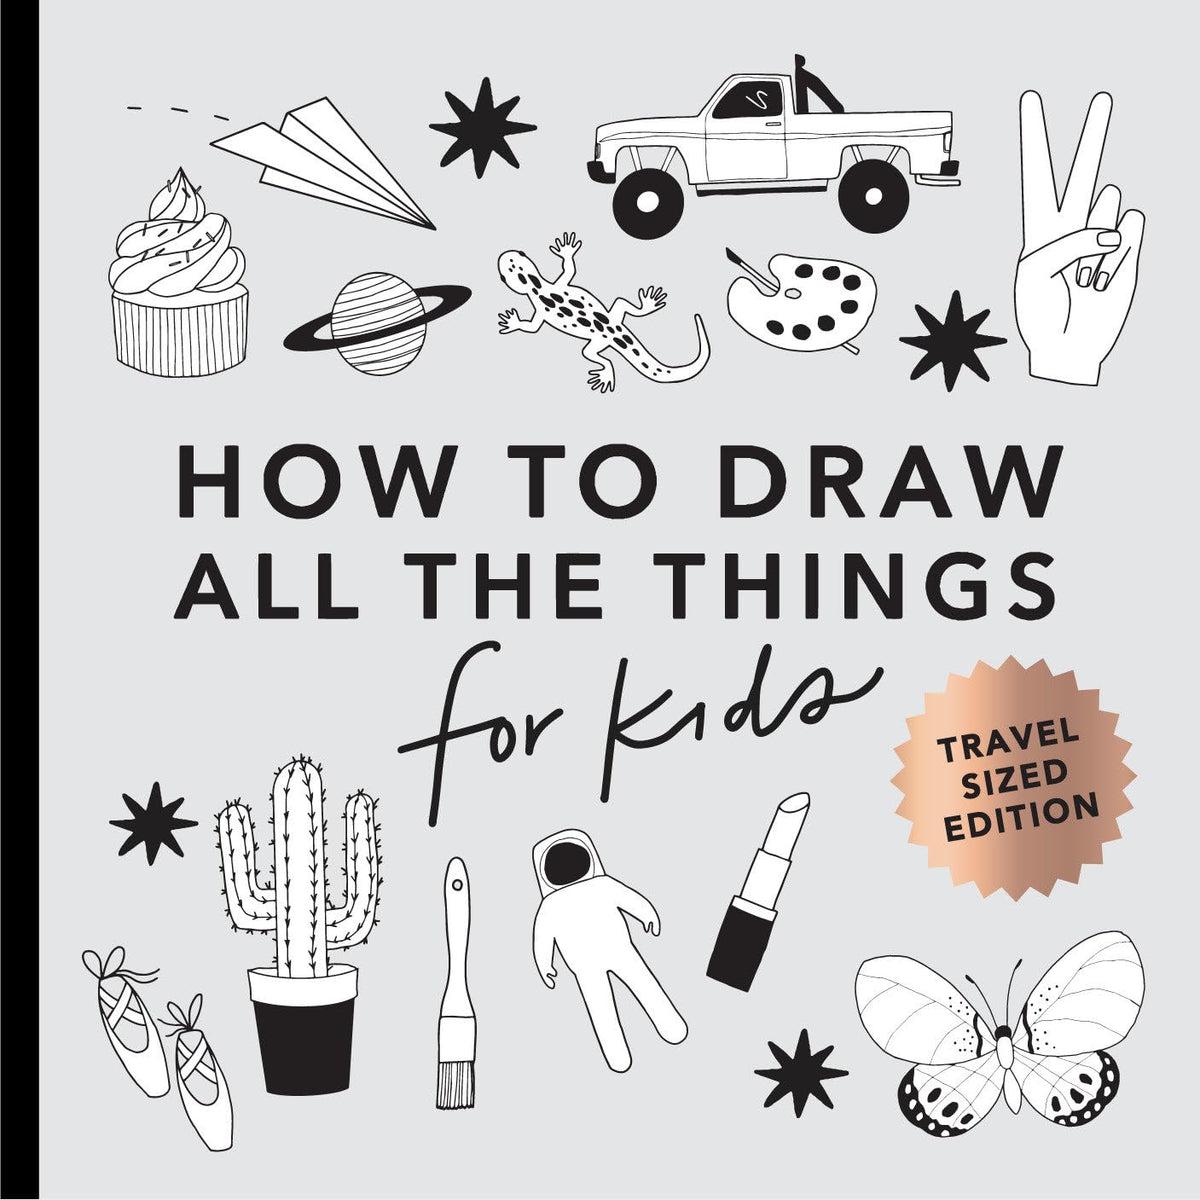 How to Draw: All the Things